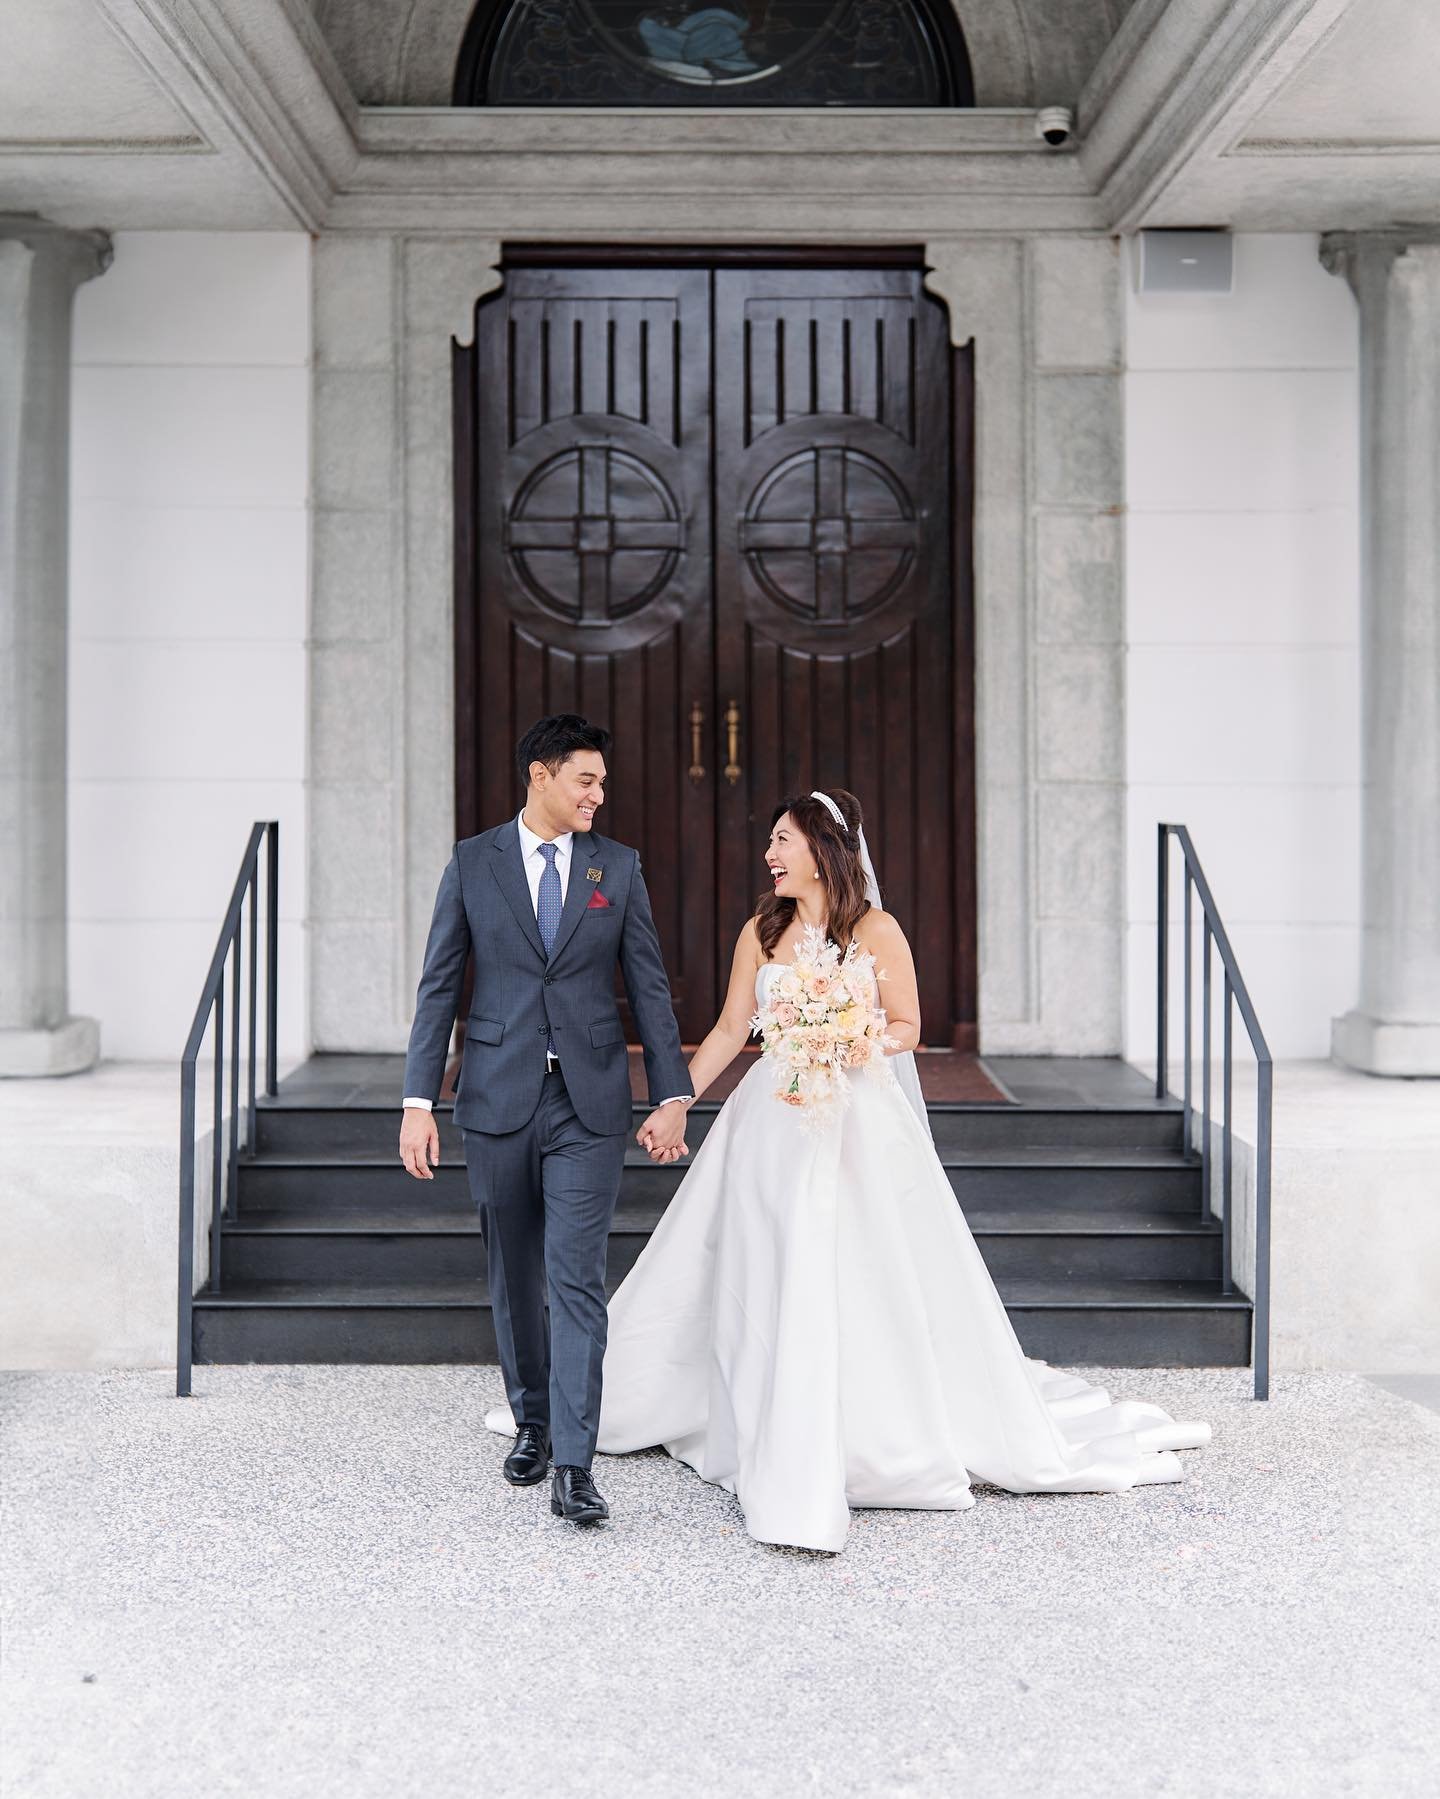 We took our vows, promising to love, honor, and cherish each other for a lifetime. The church bells rang, and our hearts sang as we became husband and wife #blessedunion 
-
Photo @antelopestudios 
Makeup @alyciatanmakeup 
Gown @moniquelhuillierbride